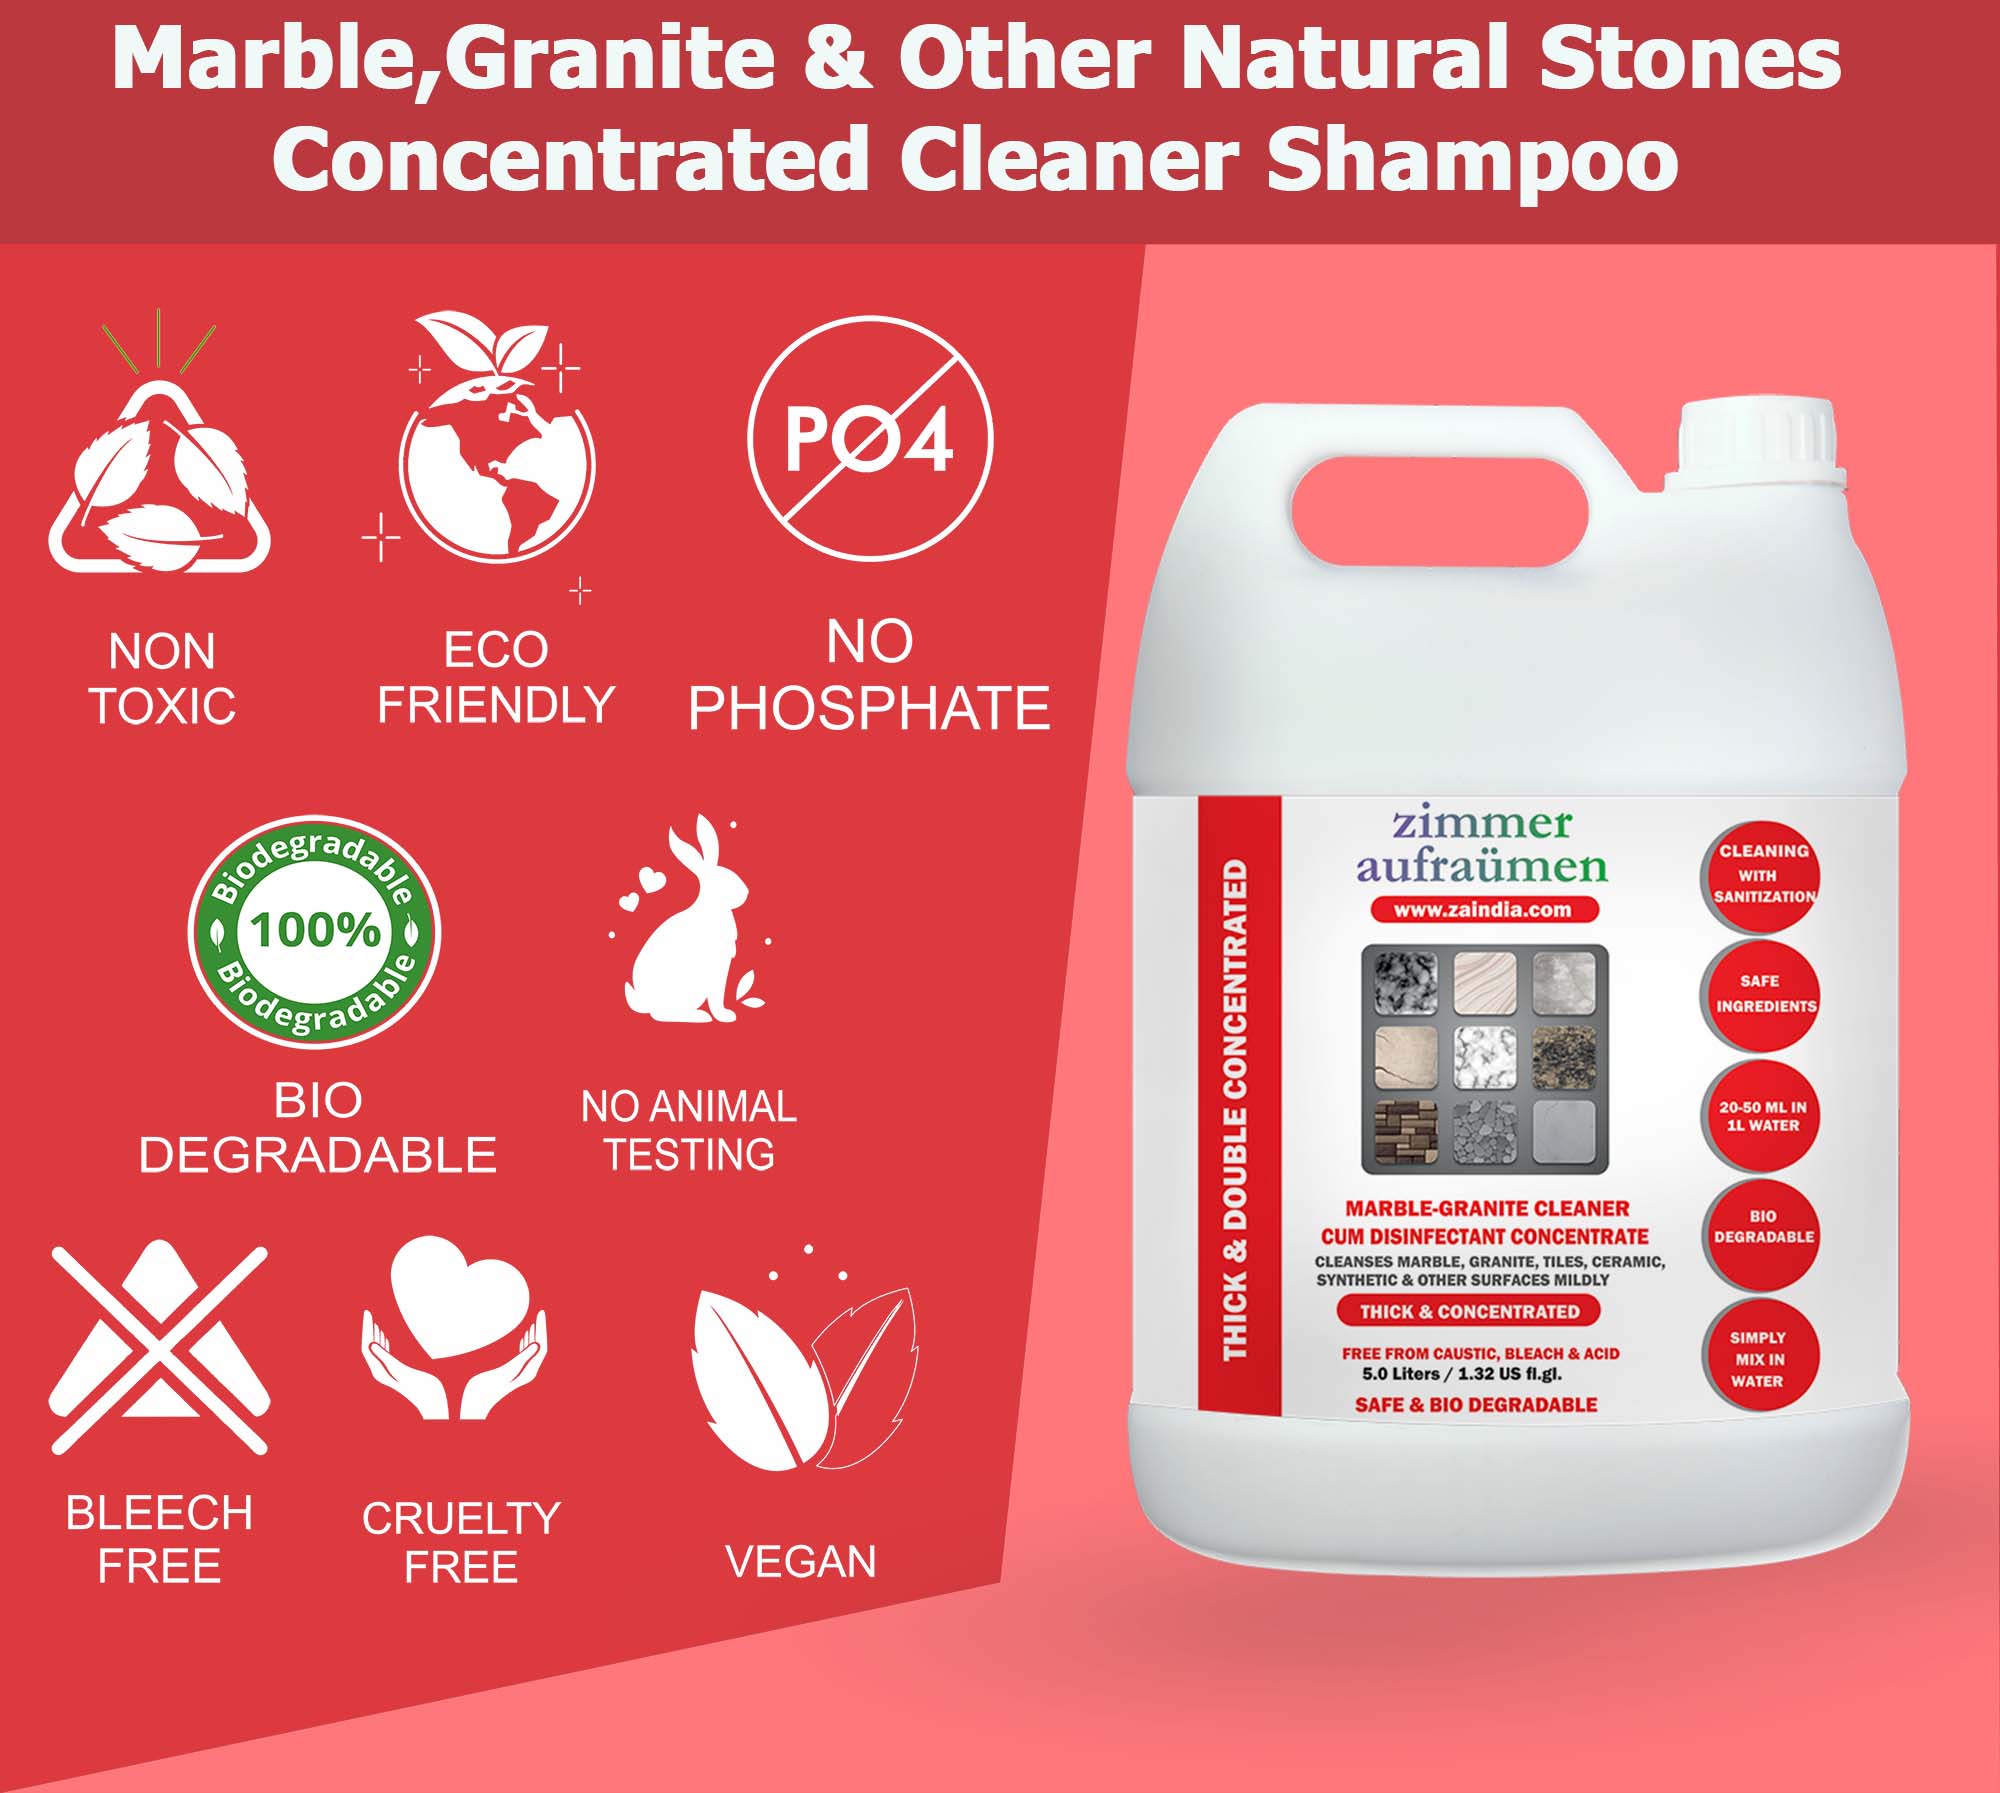 zimmer-aufraumen-marble-natural-stone-and-granite-floor-cleaner-concentrated-5l